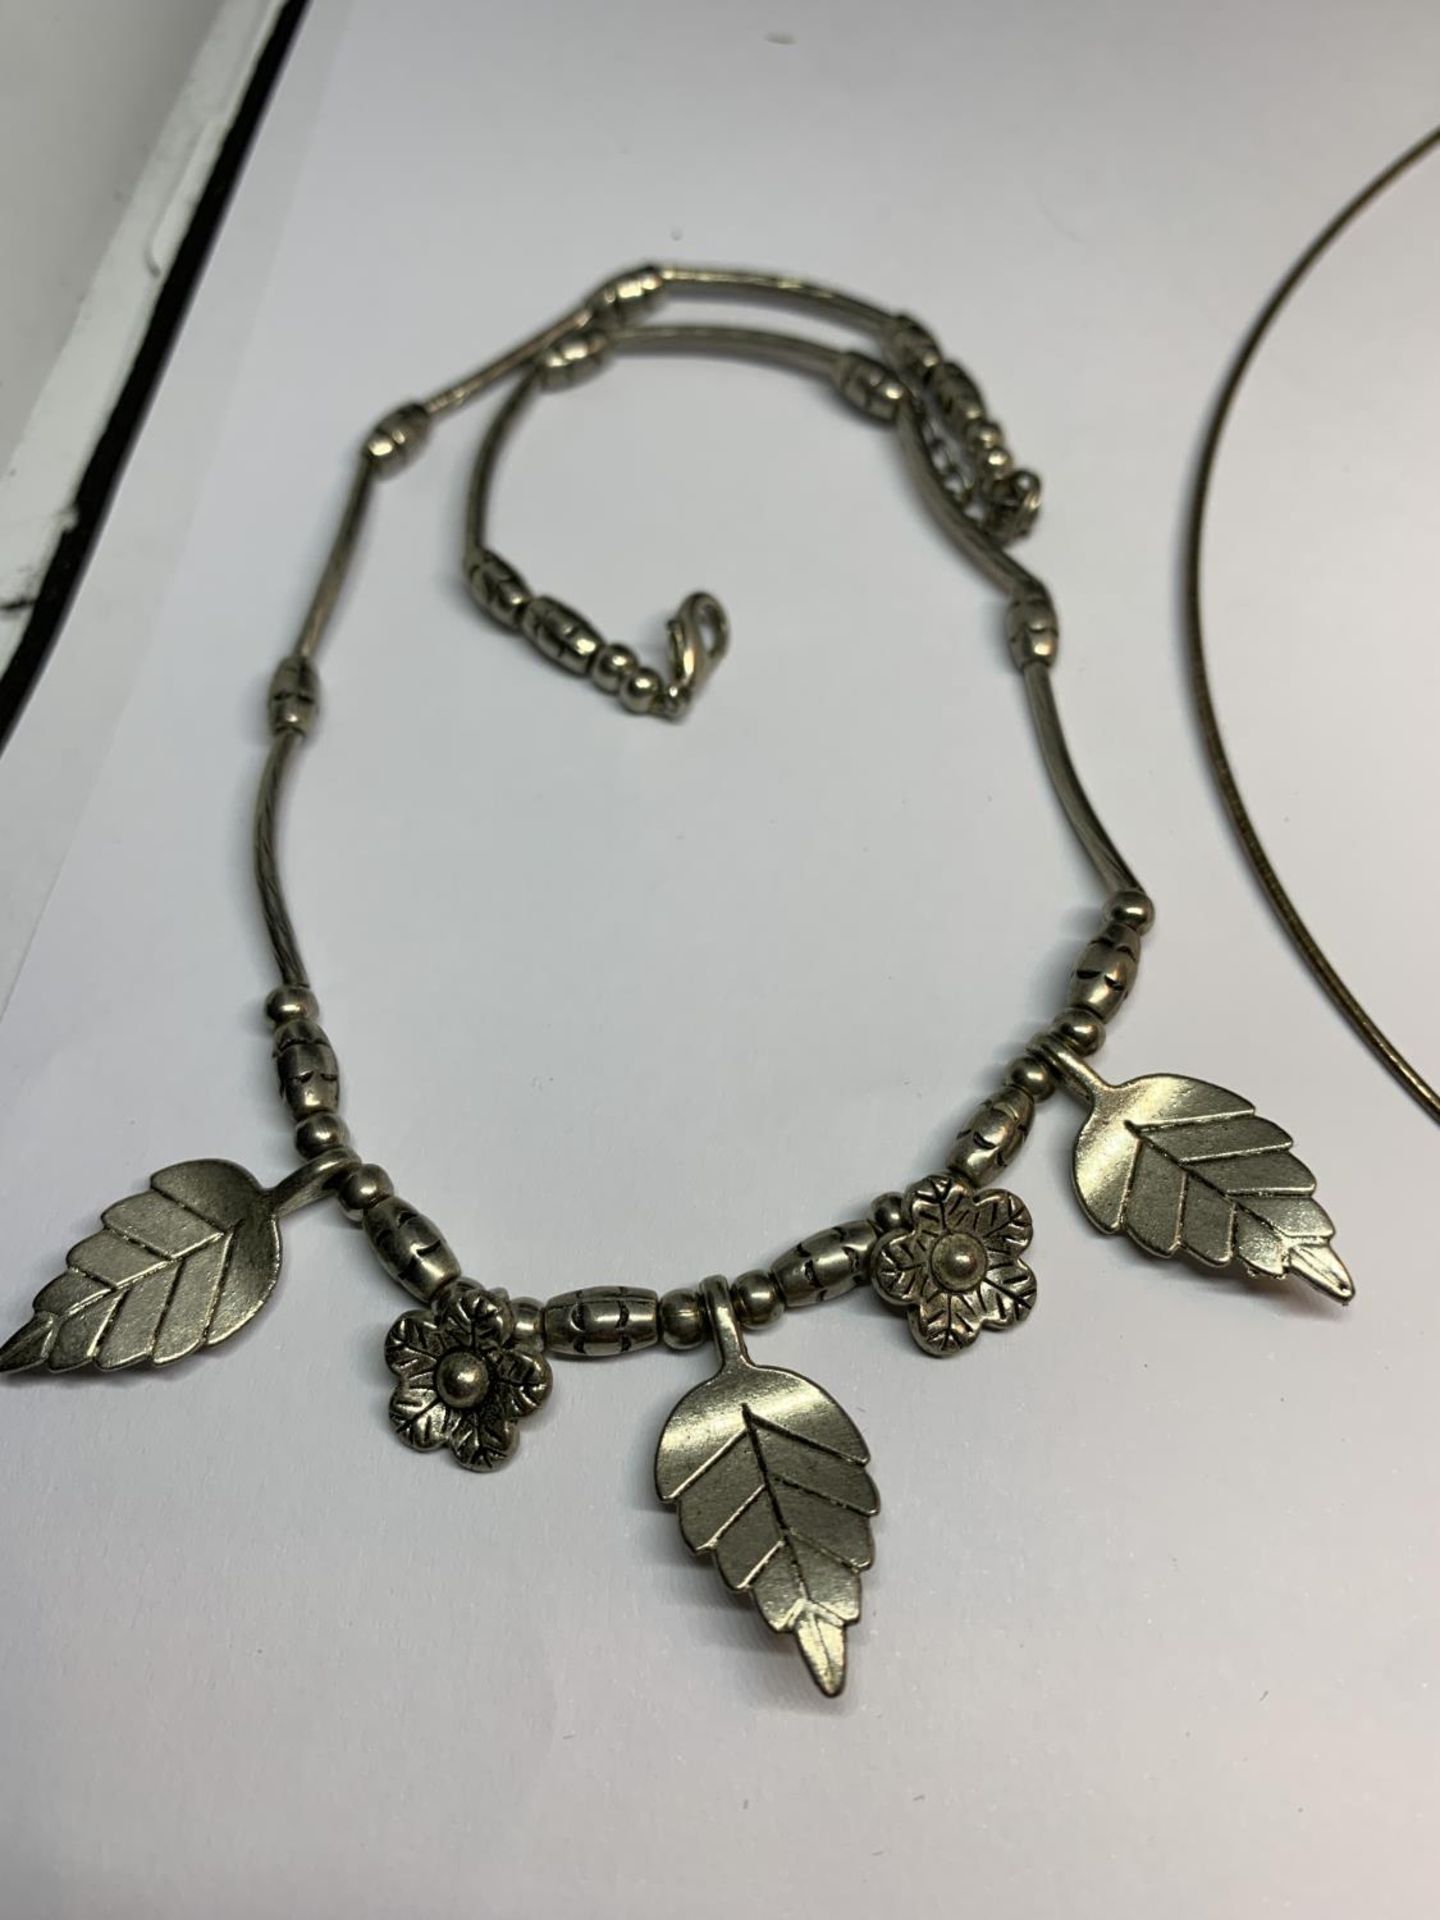 TWO SILVER NECKLACES ONE WITH LEAVES AND FLOWERS AND ONE WITH A PENDANT - Image 2 of 3